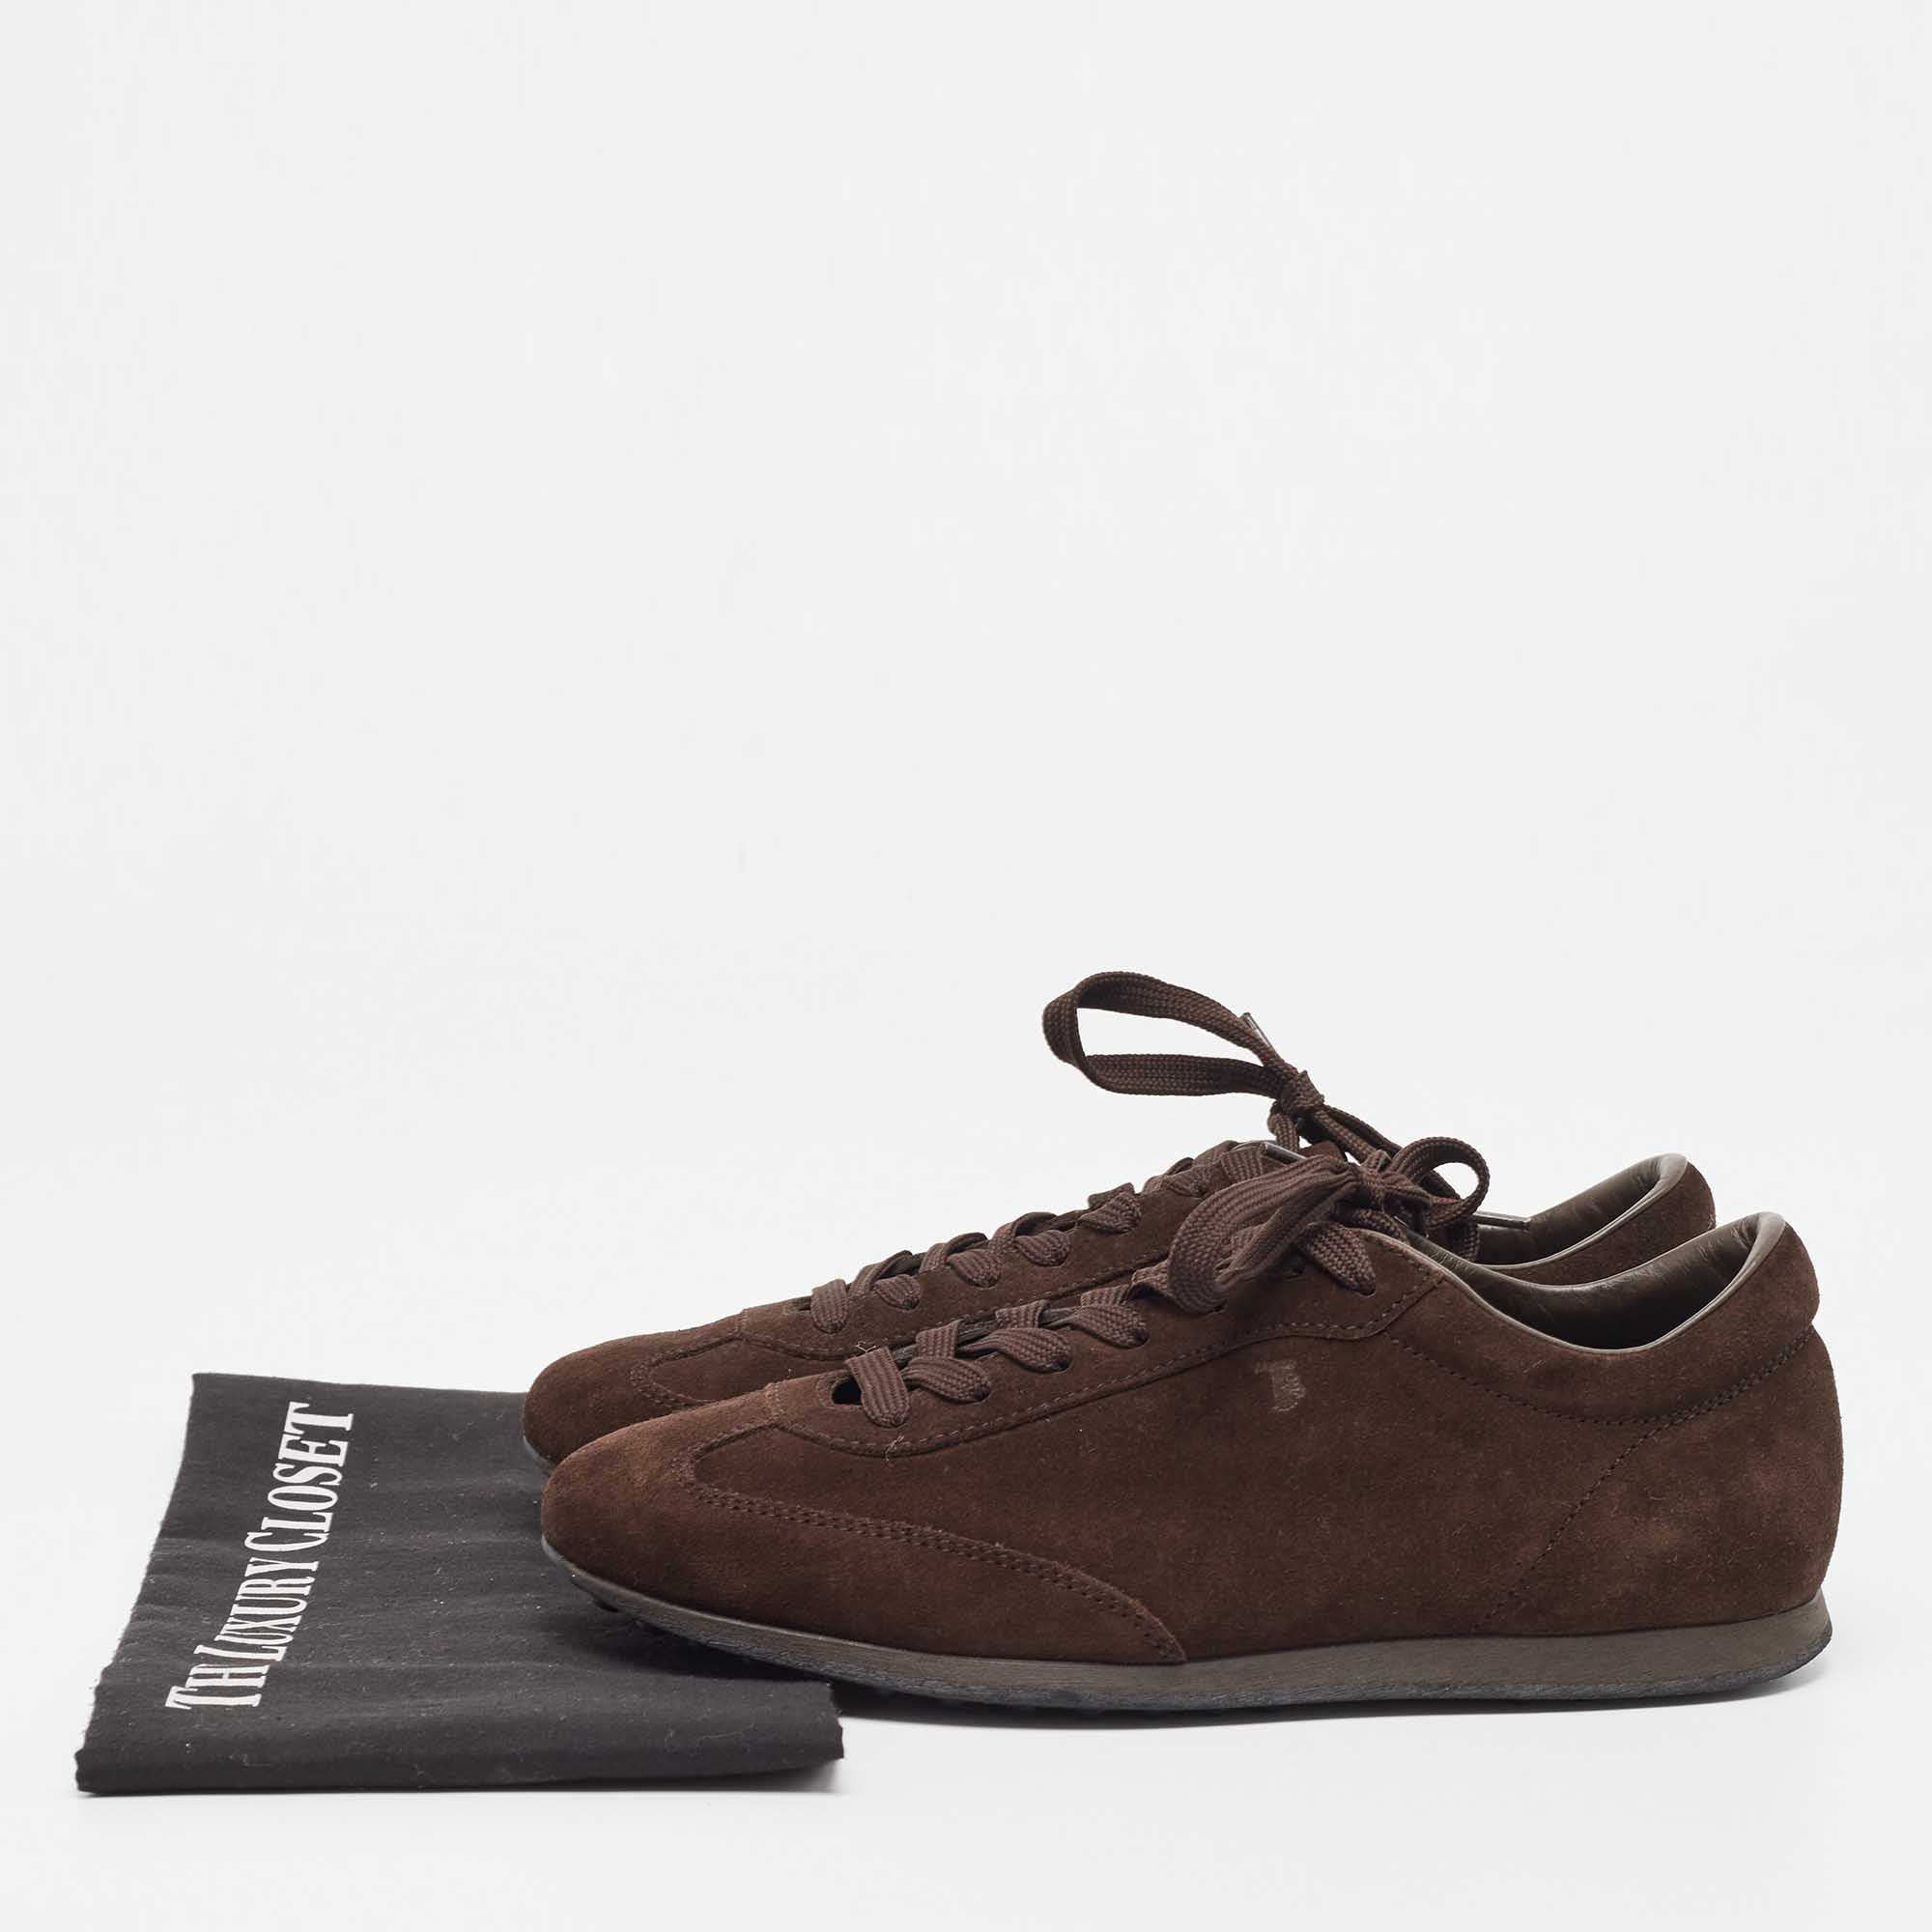 Tod's Brown Suede Lace Up Sneakers Size 39.5